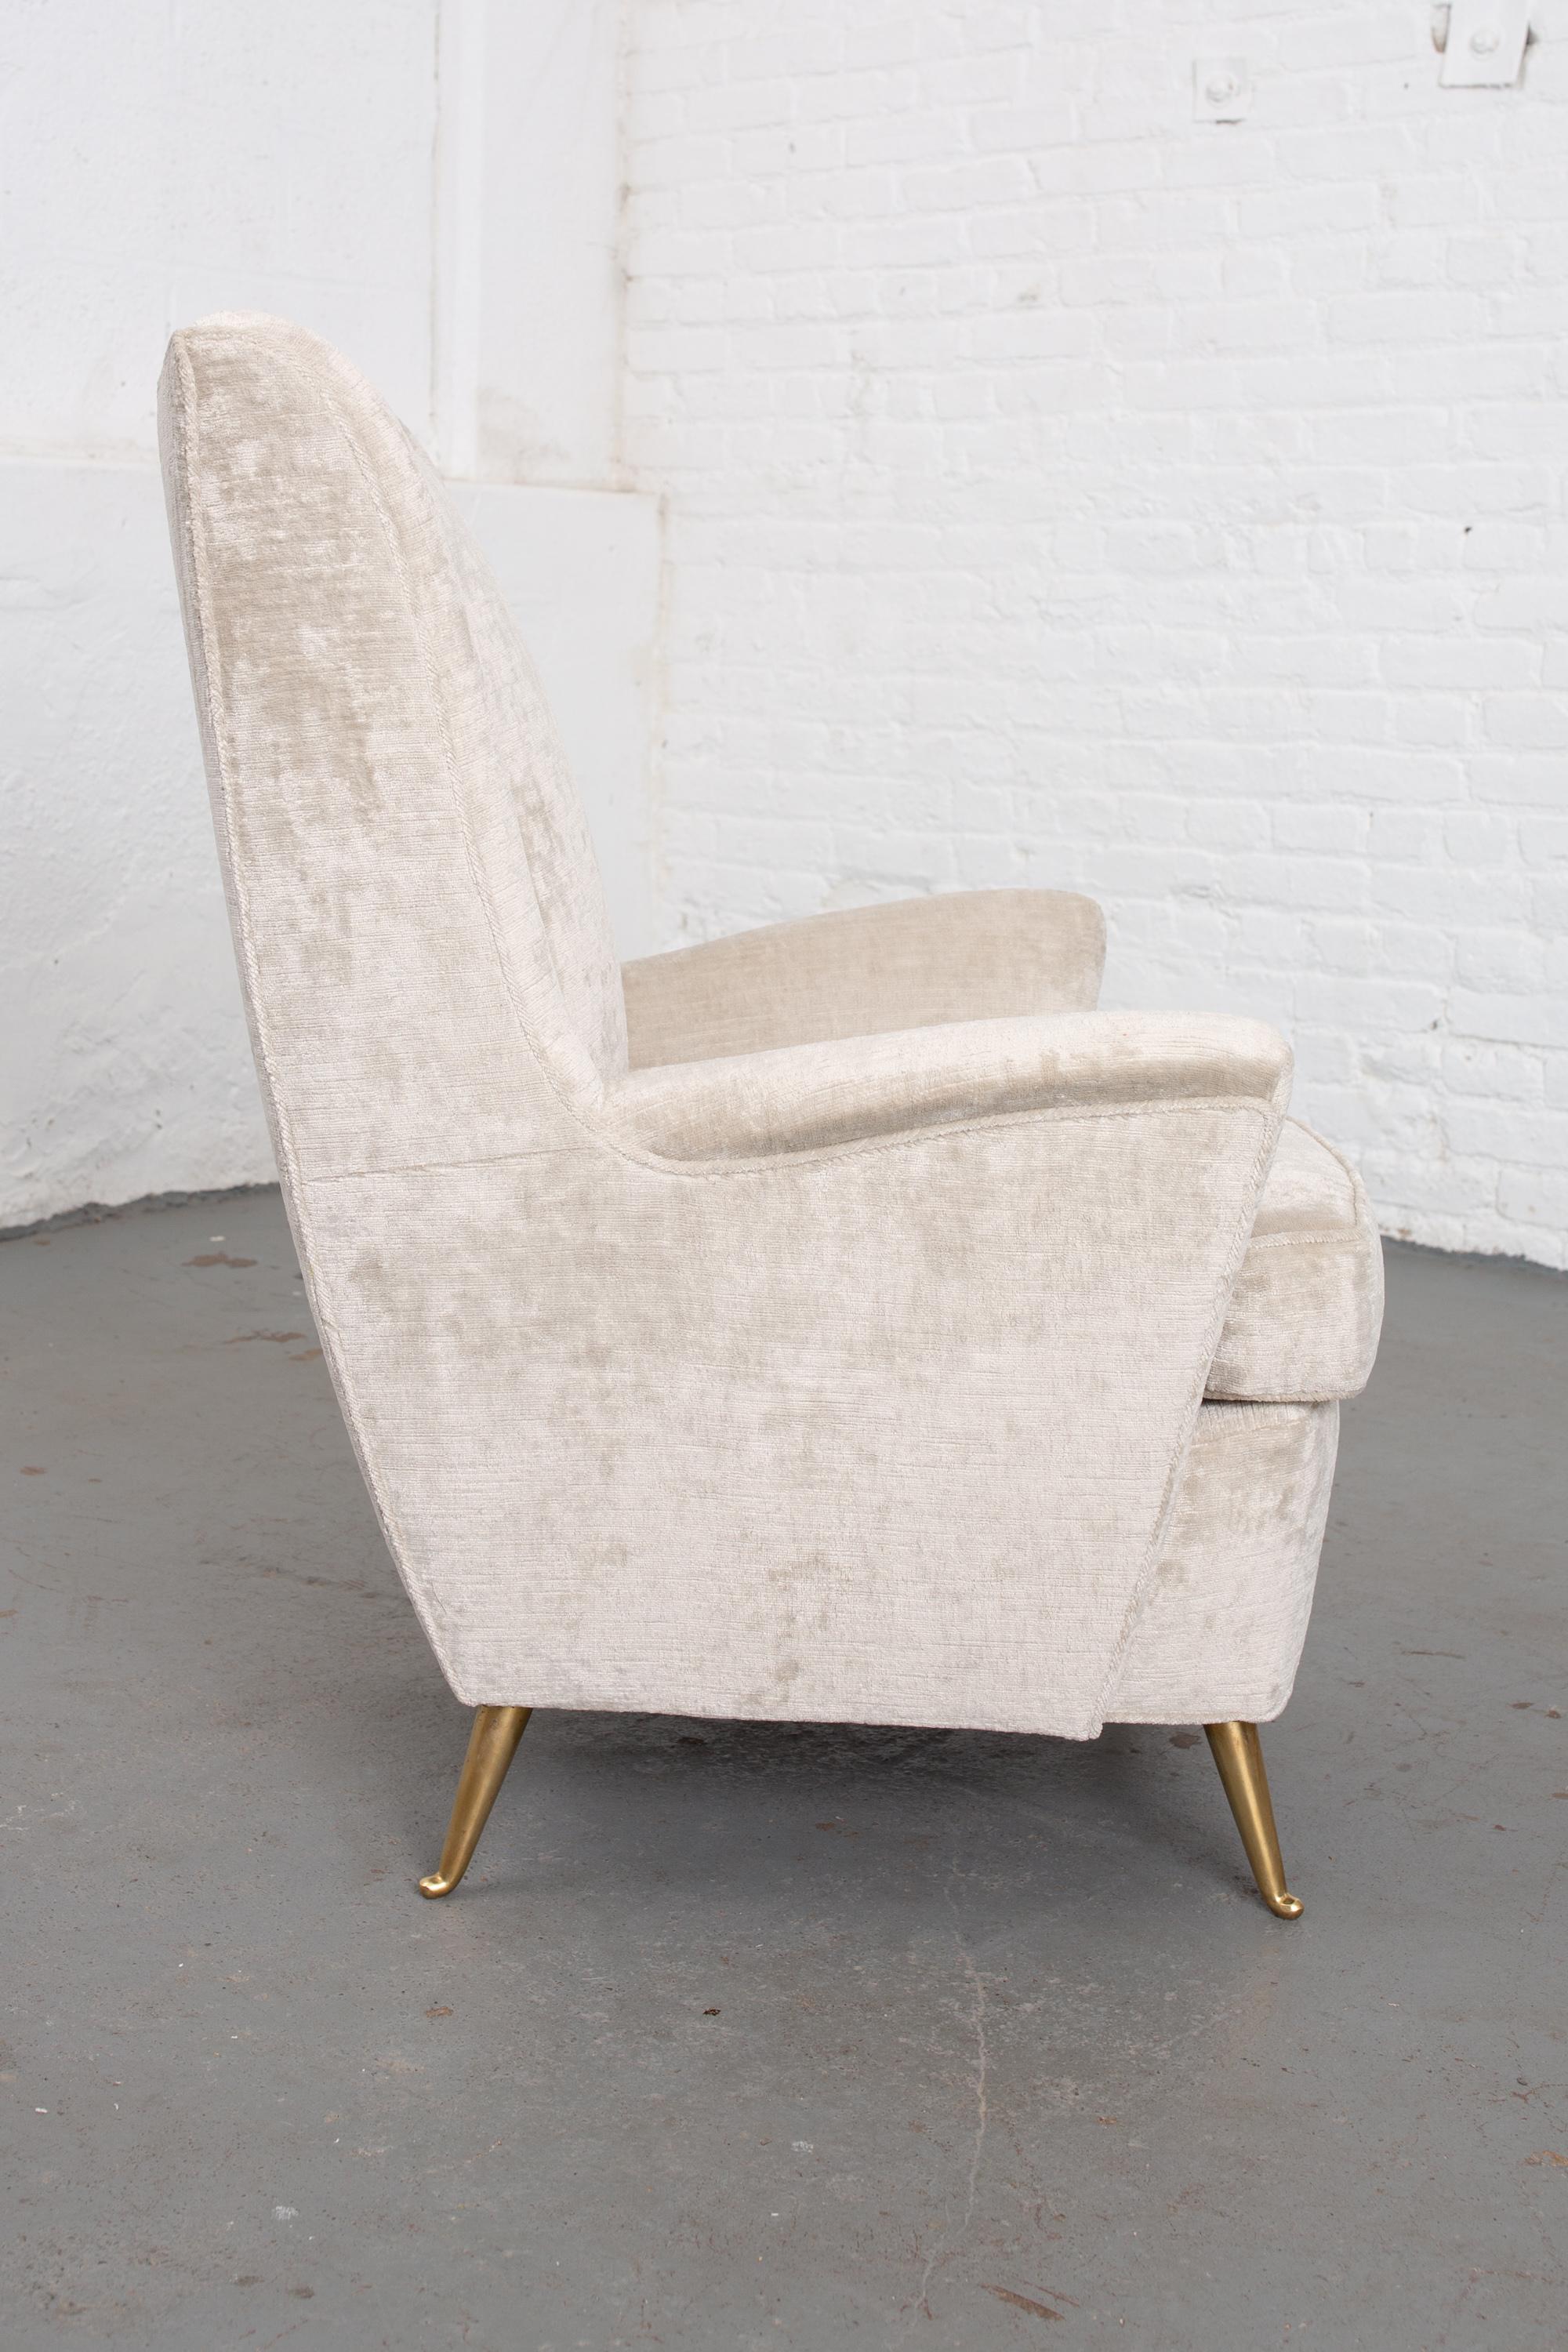 Newly upholstered Italian Moderne wingback chair with brass legs and curved back. Very comfortable.
Measures: Seat depth 18.5